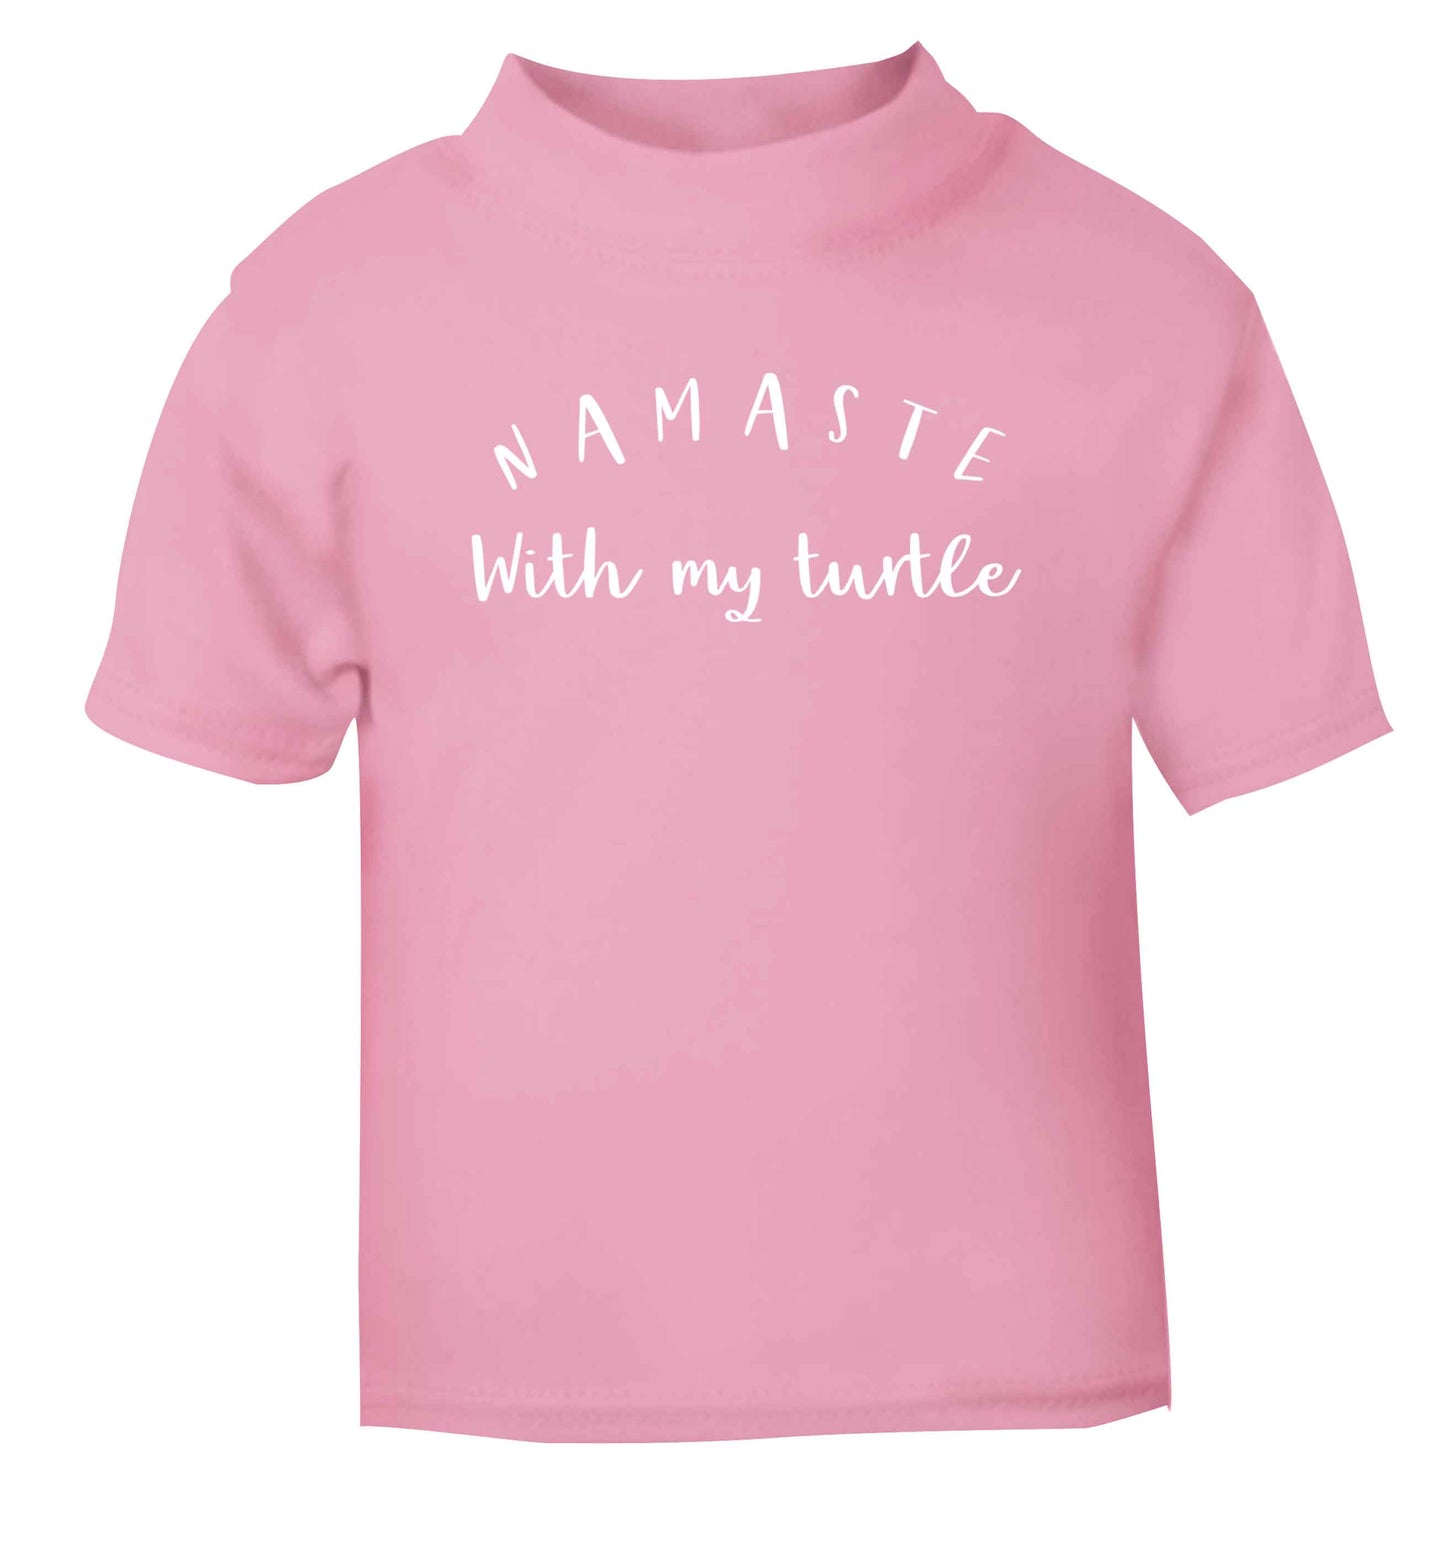 Namaste with my turtle light pink Baby Toddler Tshirt 2 Years